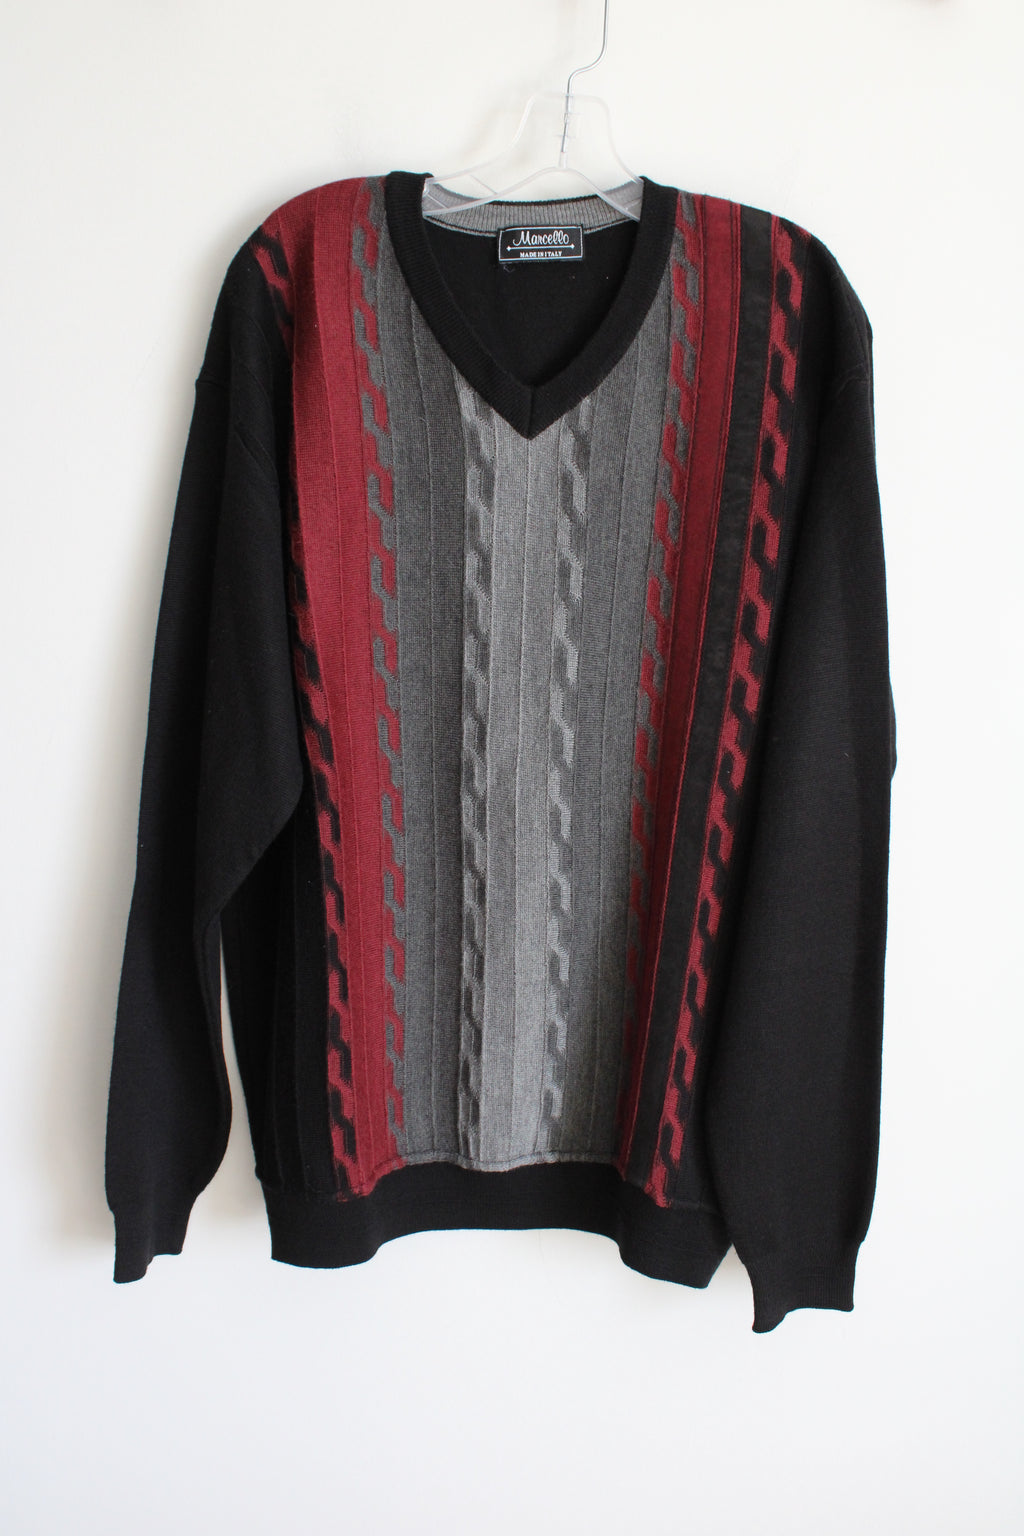 Marcello Merino Wool Blend Made In Italy Black Red Gray Vintage Sweater | XL